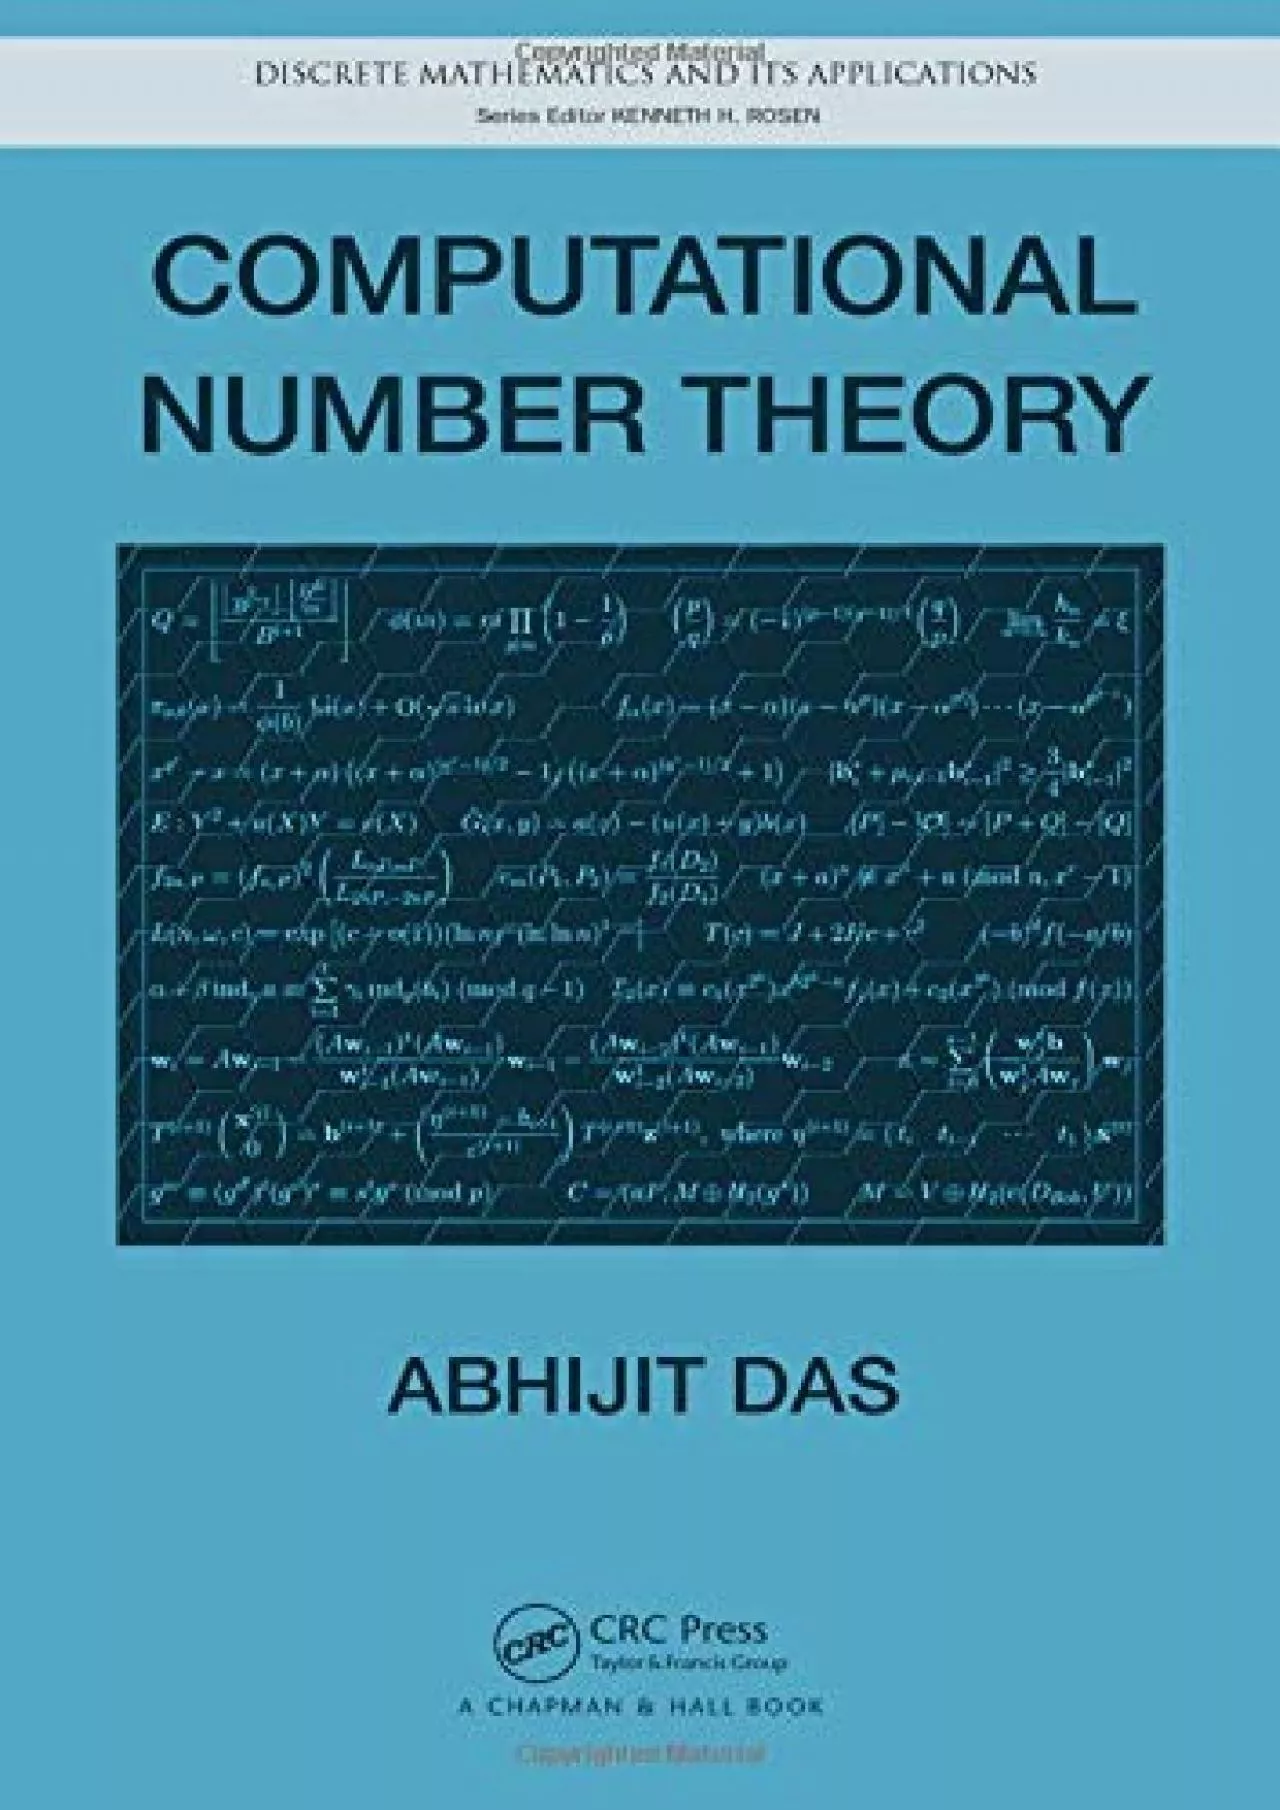 (BOOK)-Computational Number Theory (Discrete Mathematics and Its Applications)